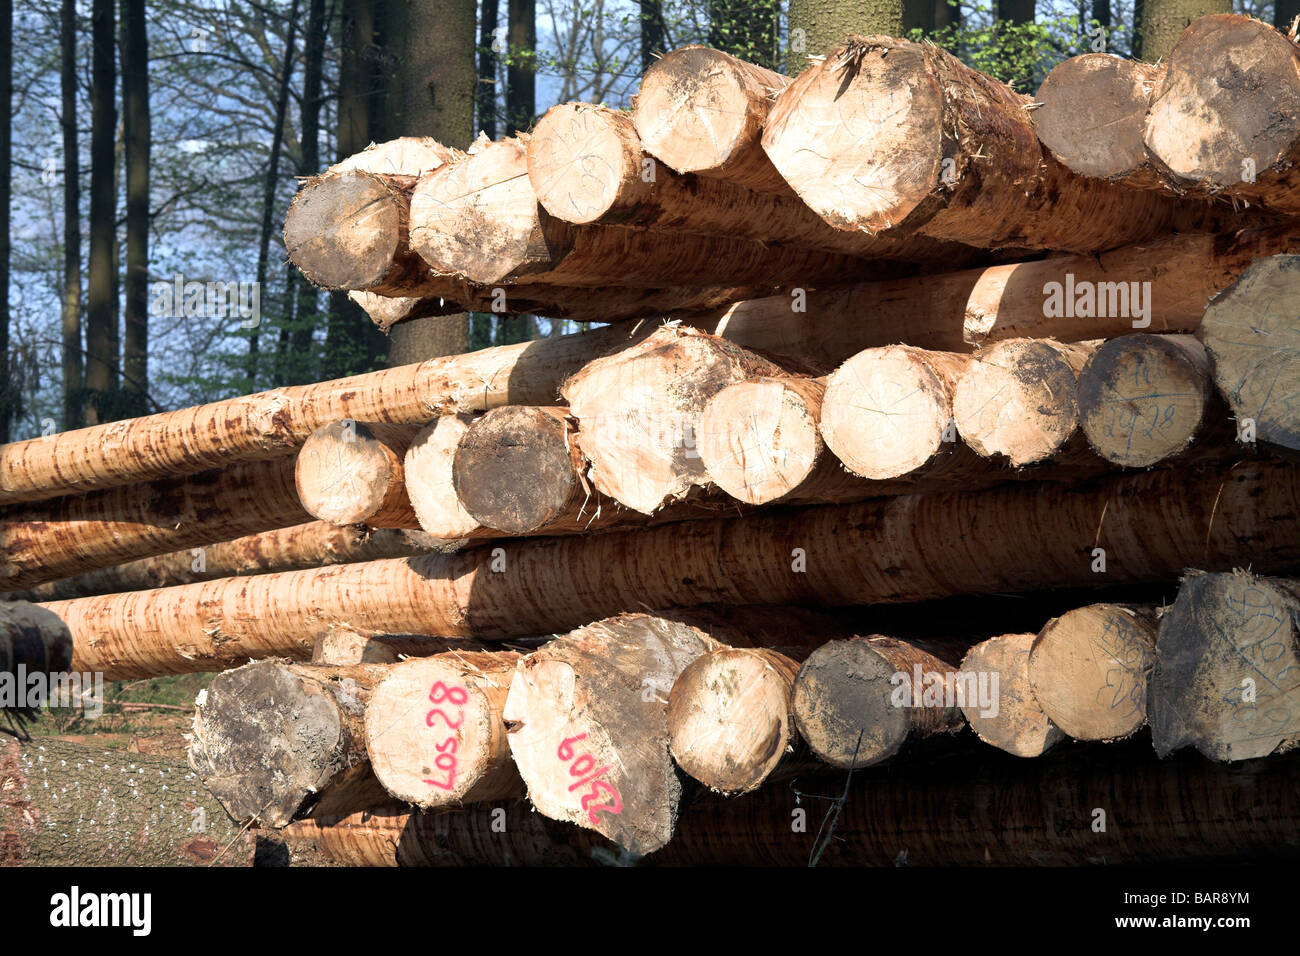 Wooden logs drying in the fresh air. Stock Photo